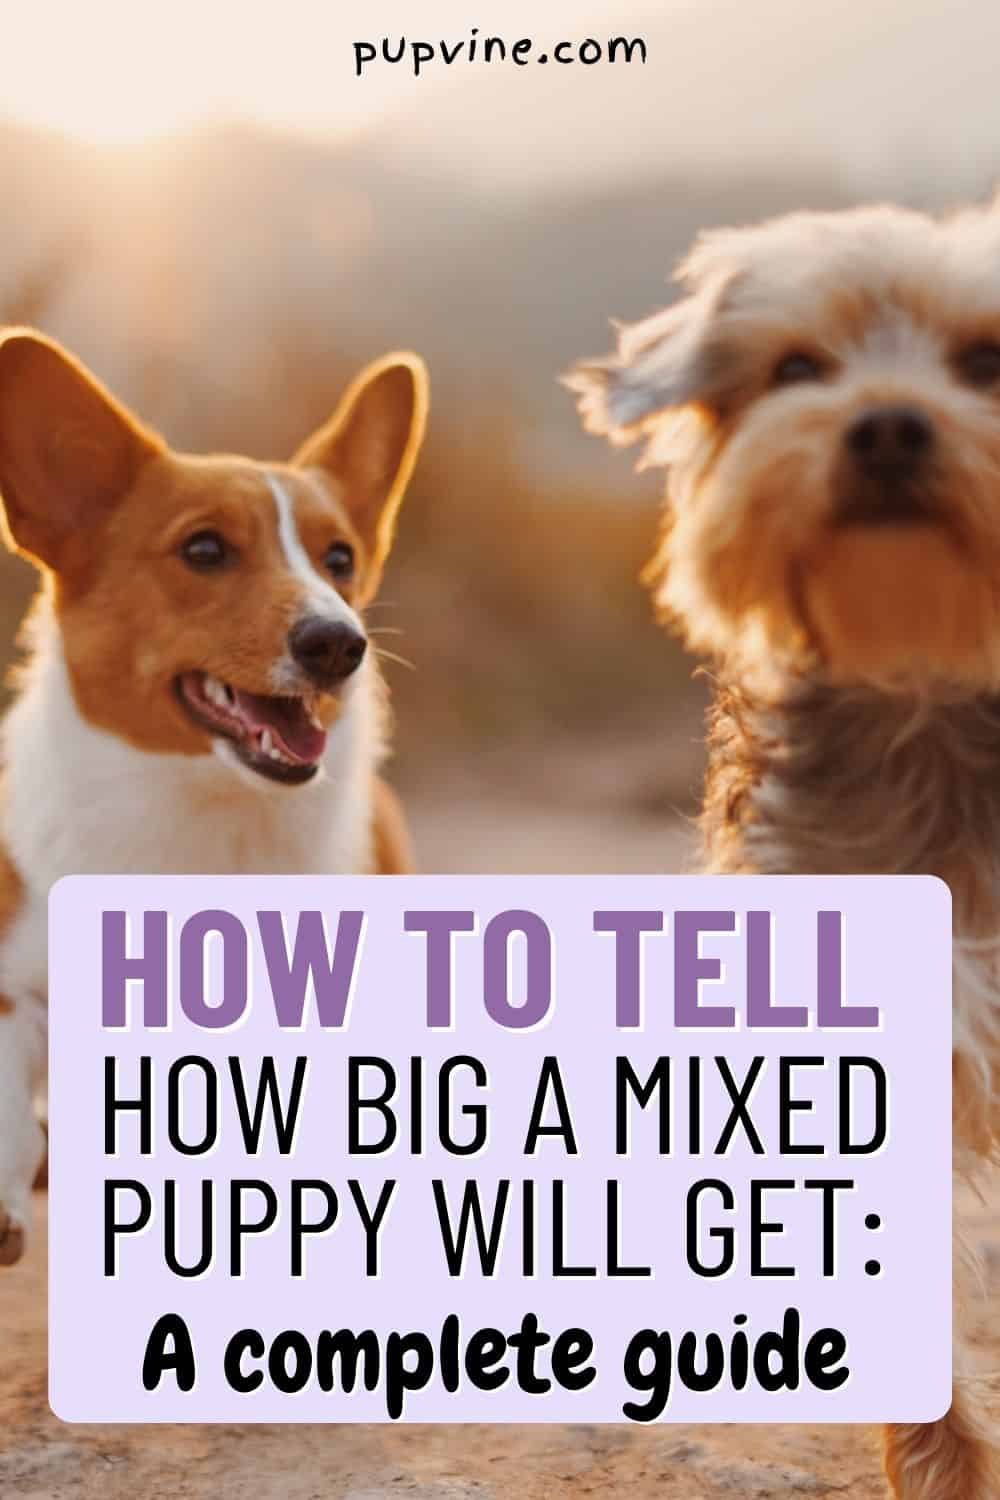 How To Tell How Big A Mixed Puppy Will Get – A Complete Guide